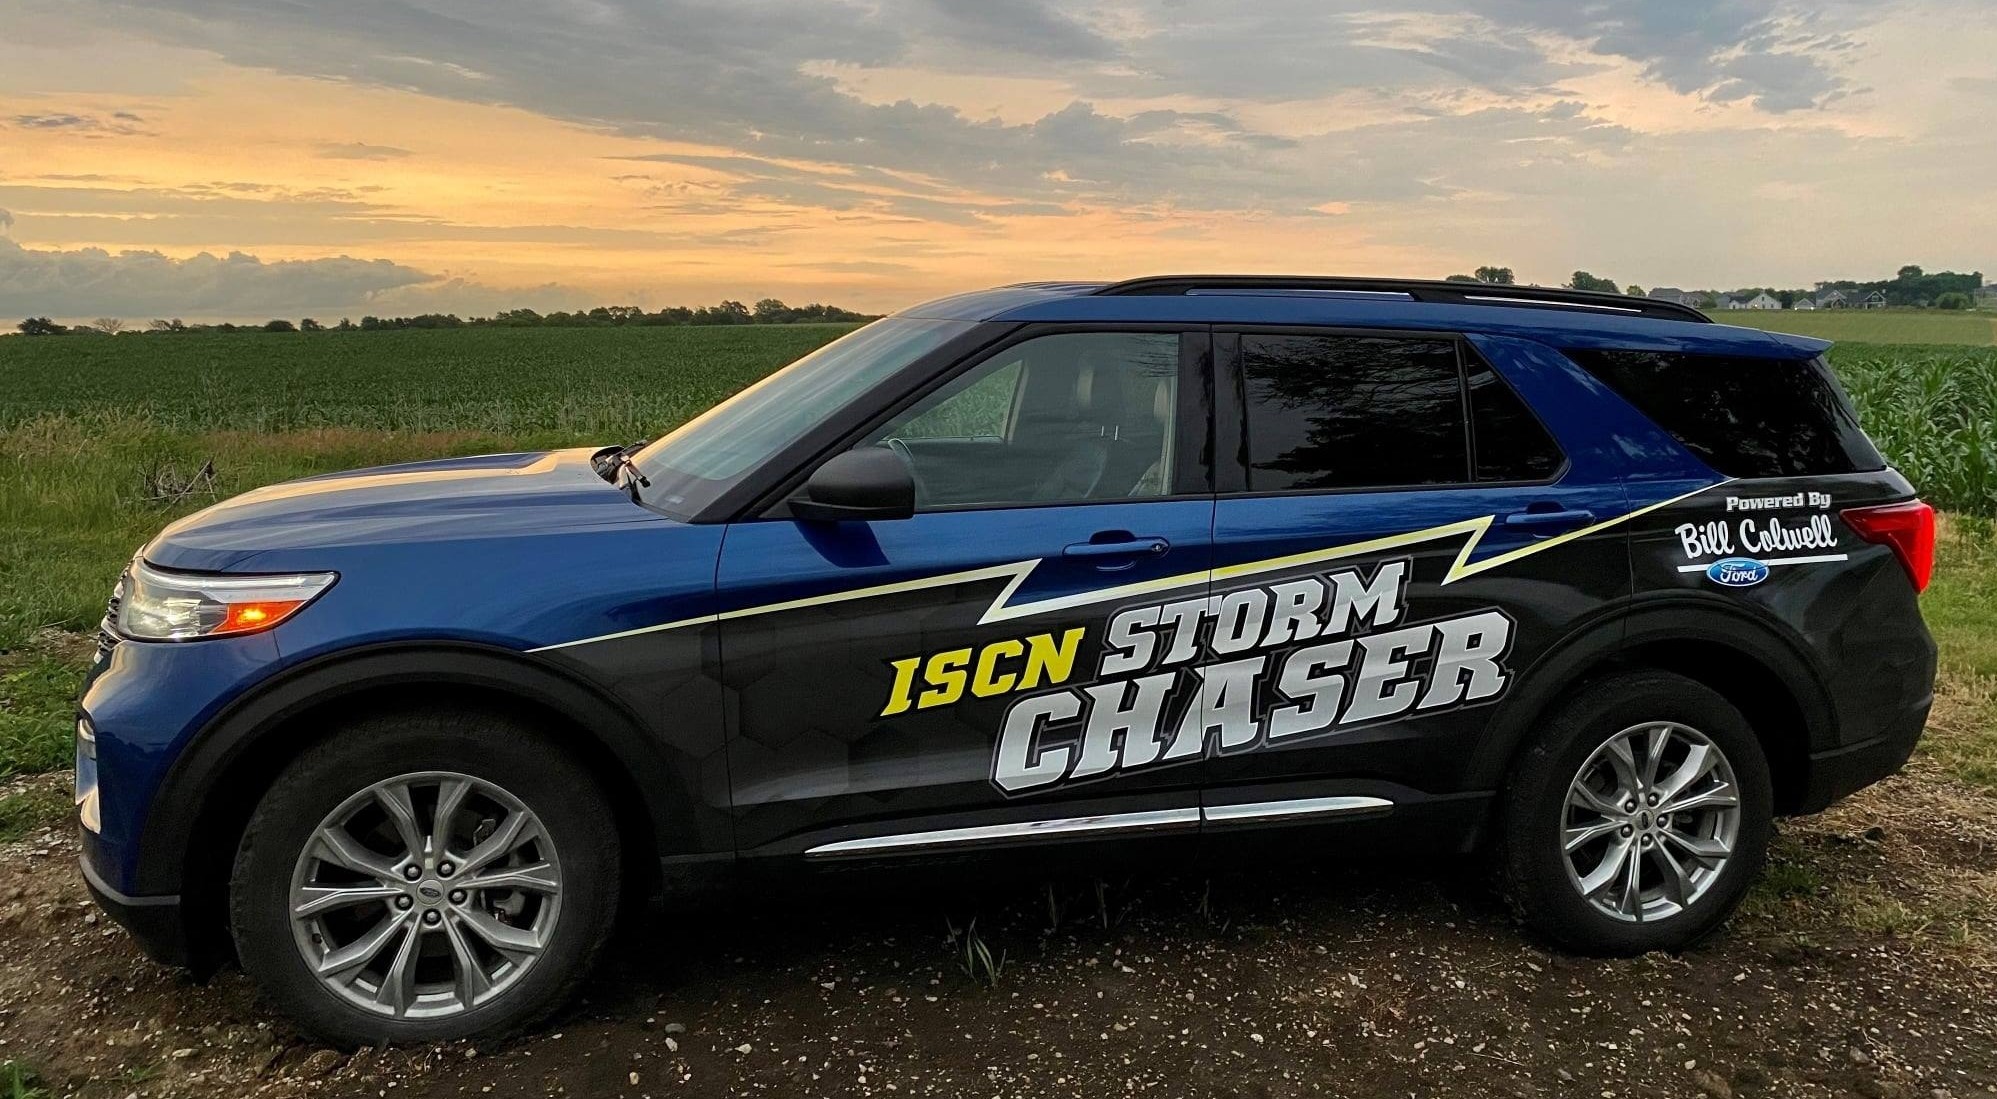 ISCN Storm Chaser Vehicle Powered by Bill Colwell Ford